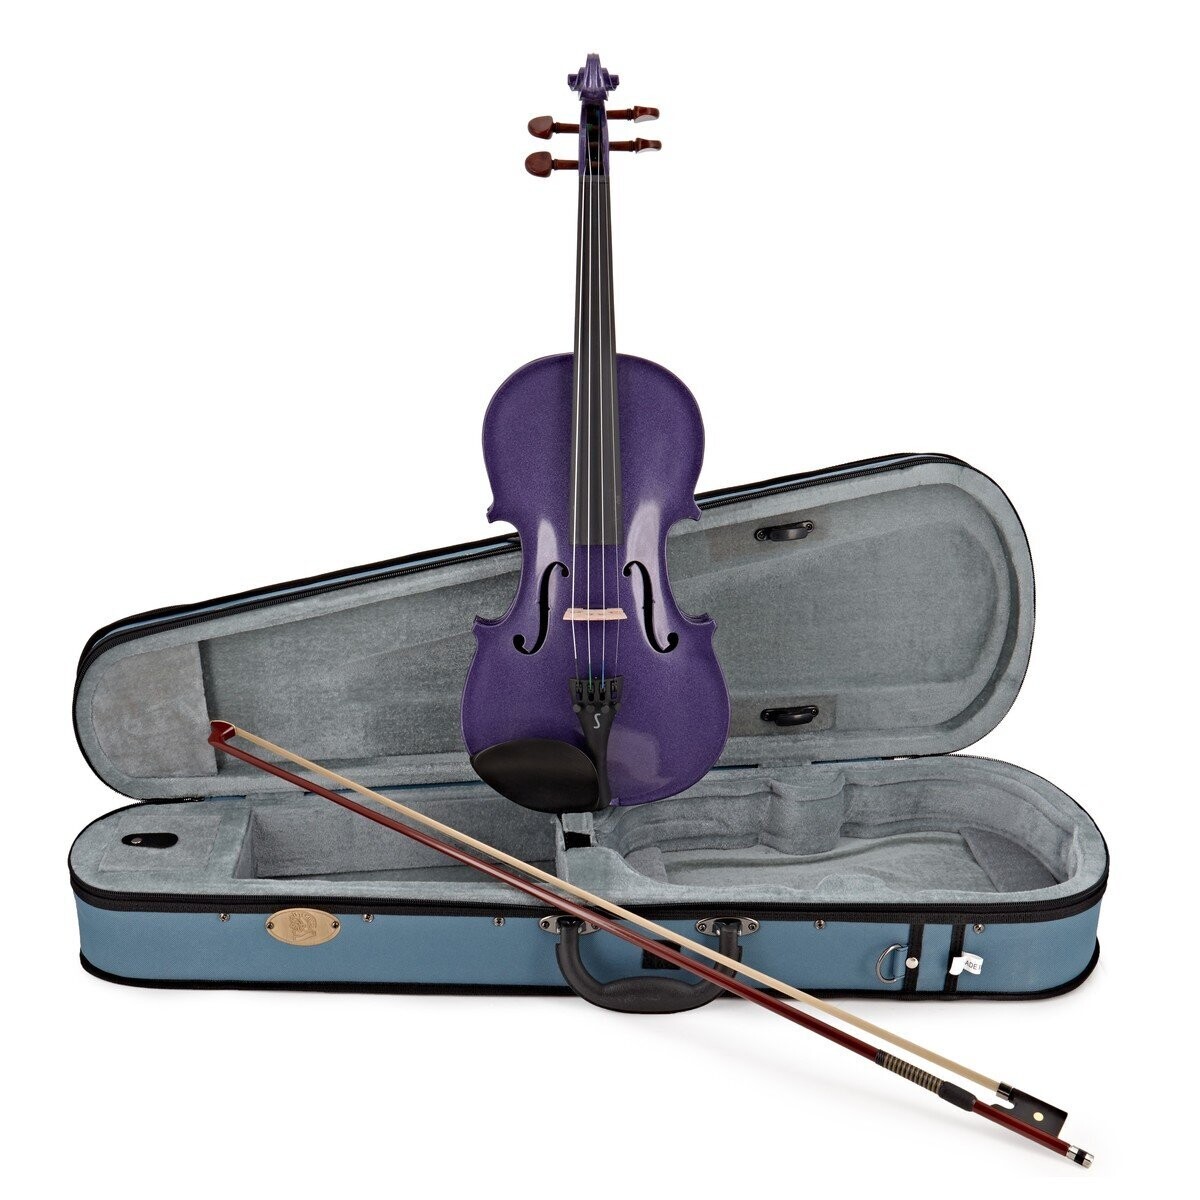 Harlequin Viola Outfit 16" in Purple with Lightweight Case P&H fibreglass bow